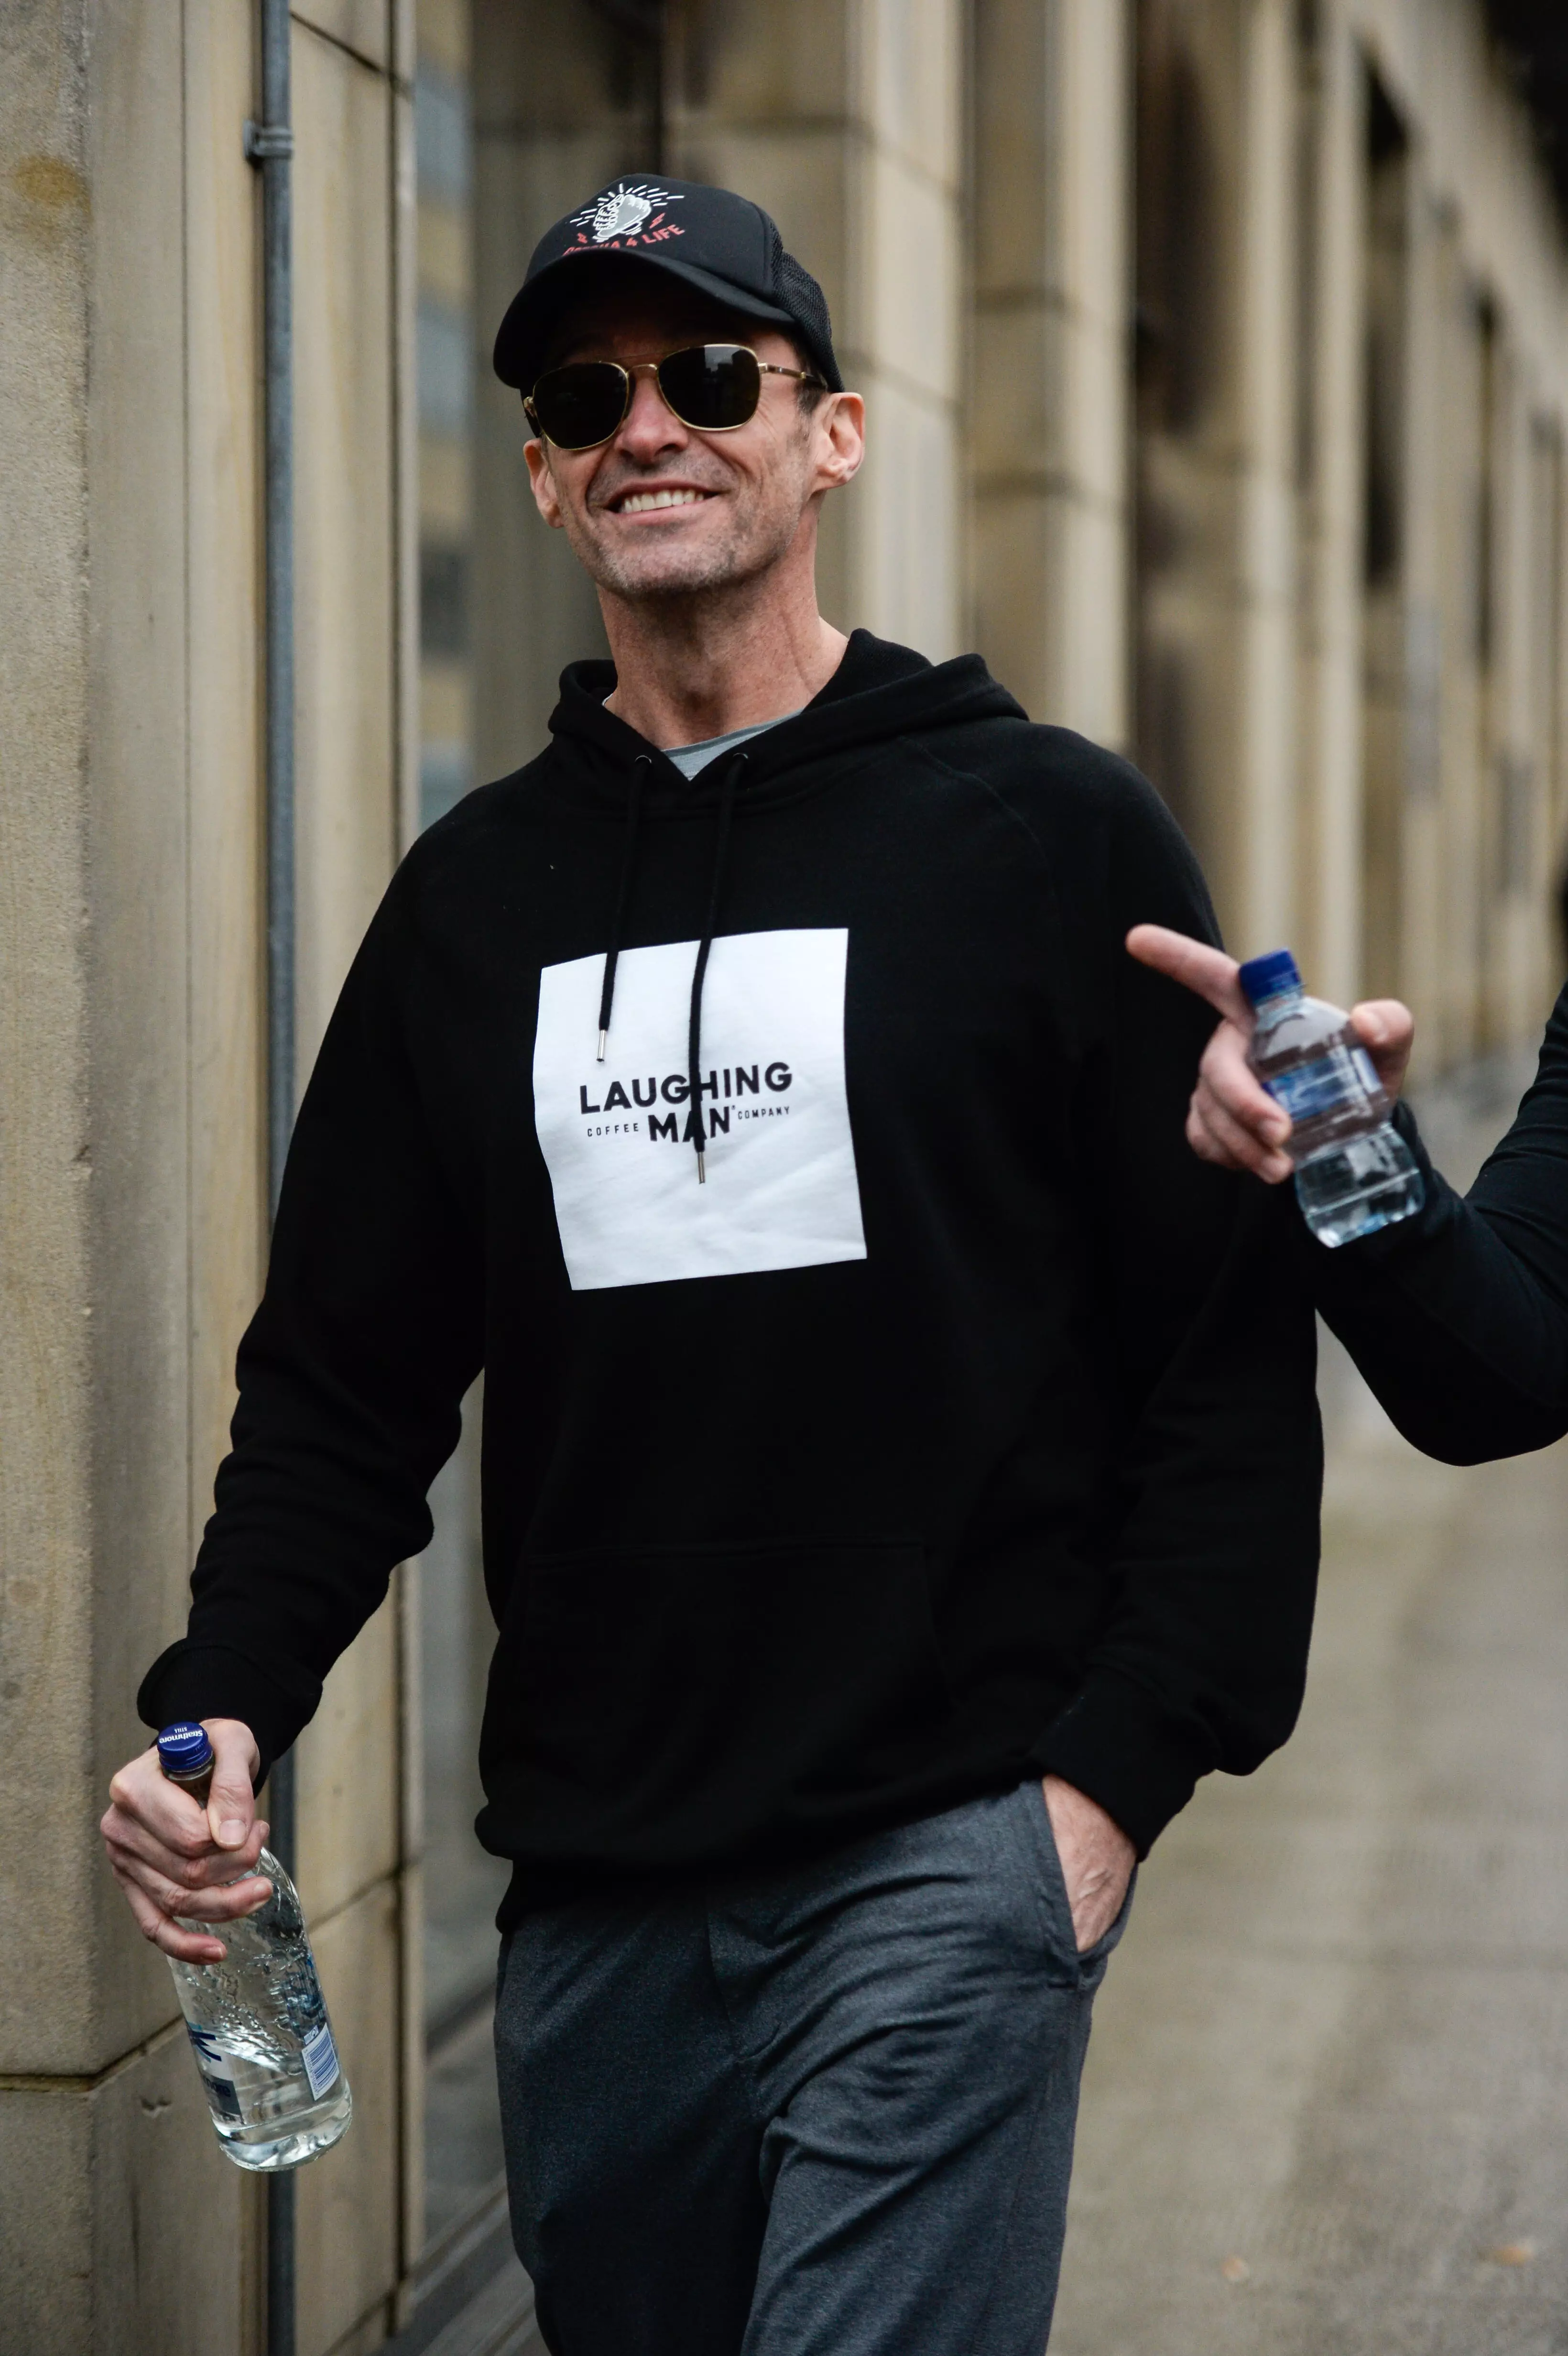 Hugh Jackman was in Glasgow to kick off the world tour of his new show.